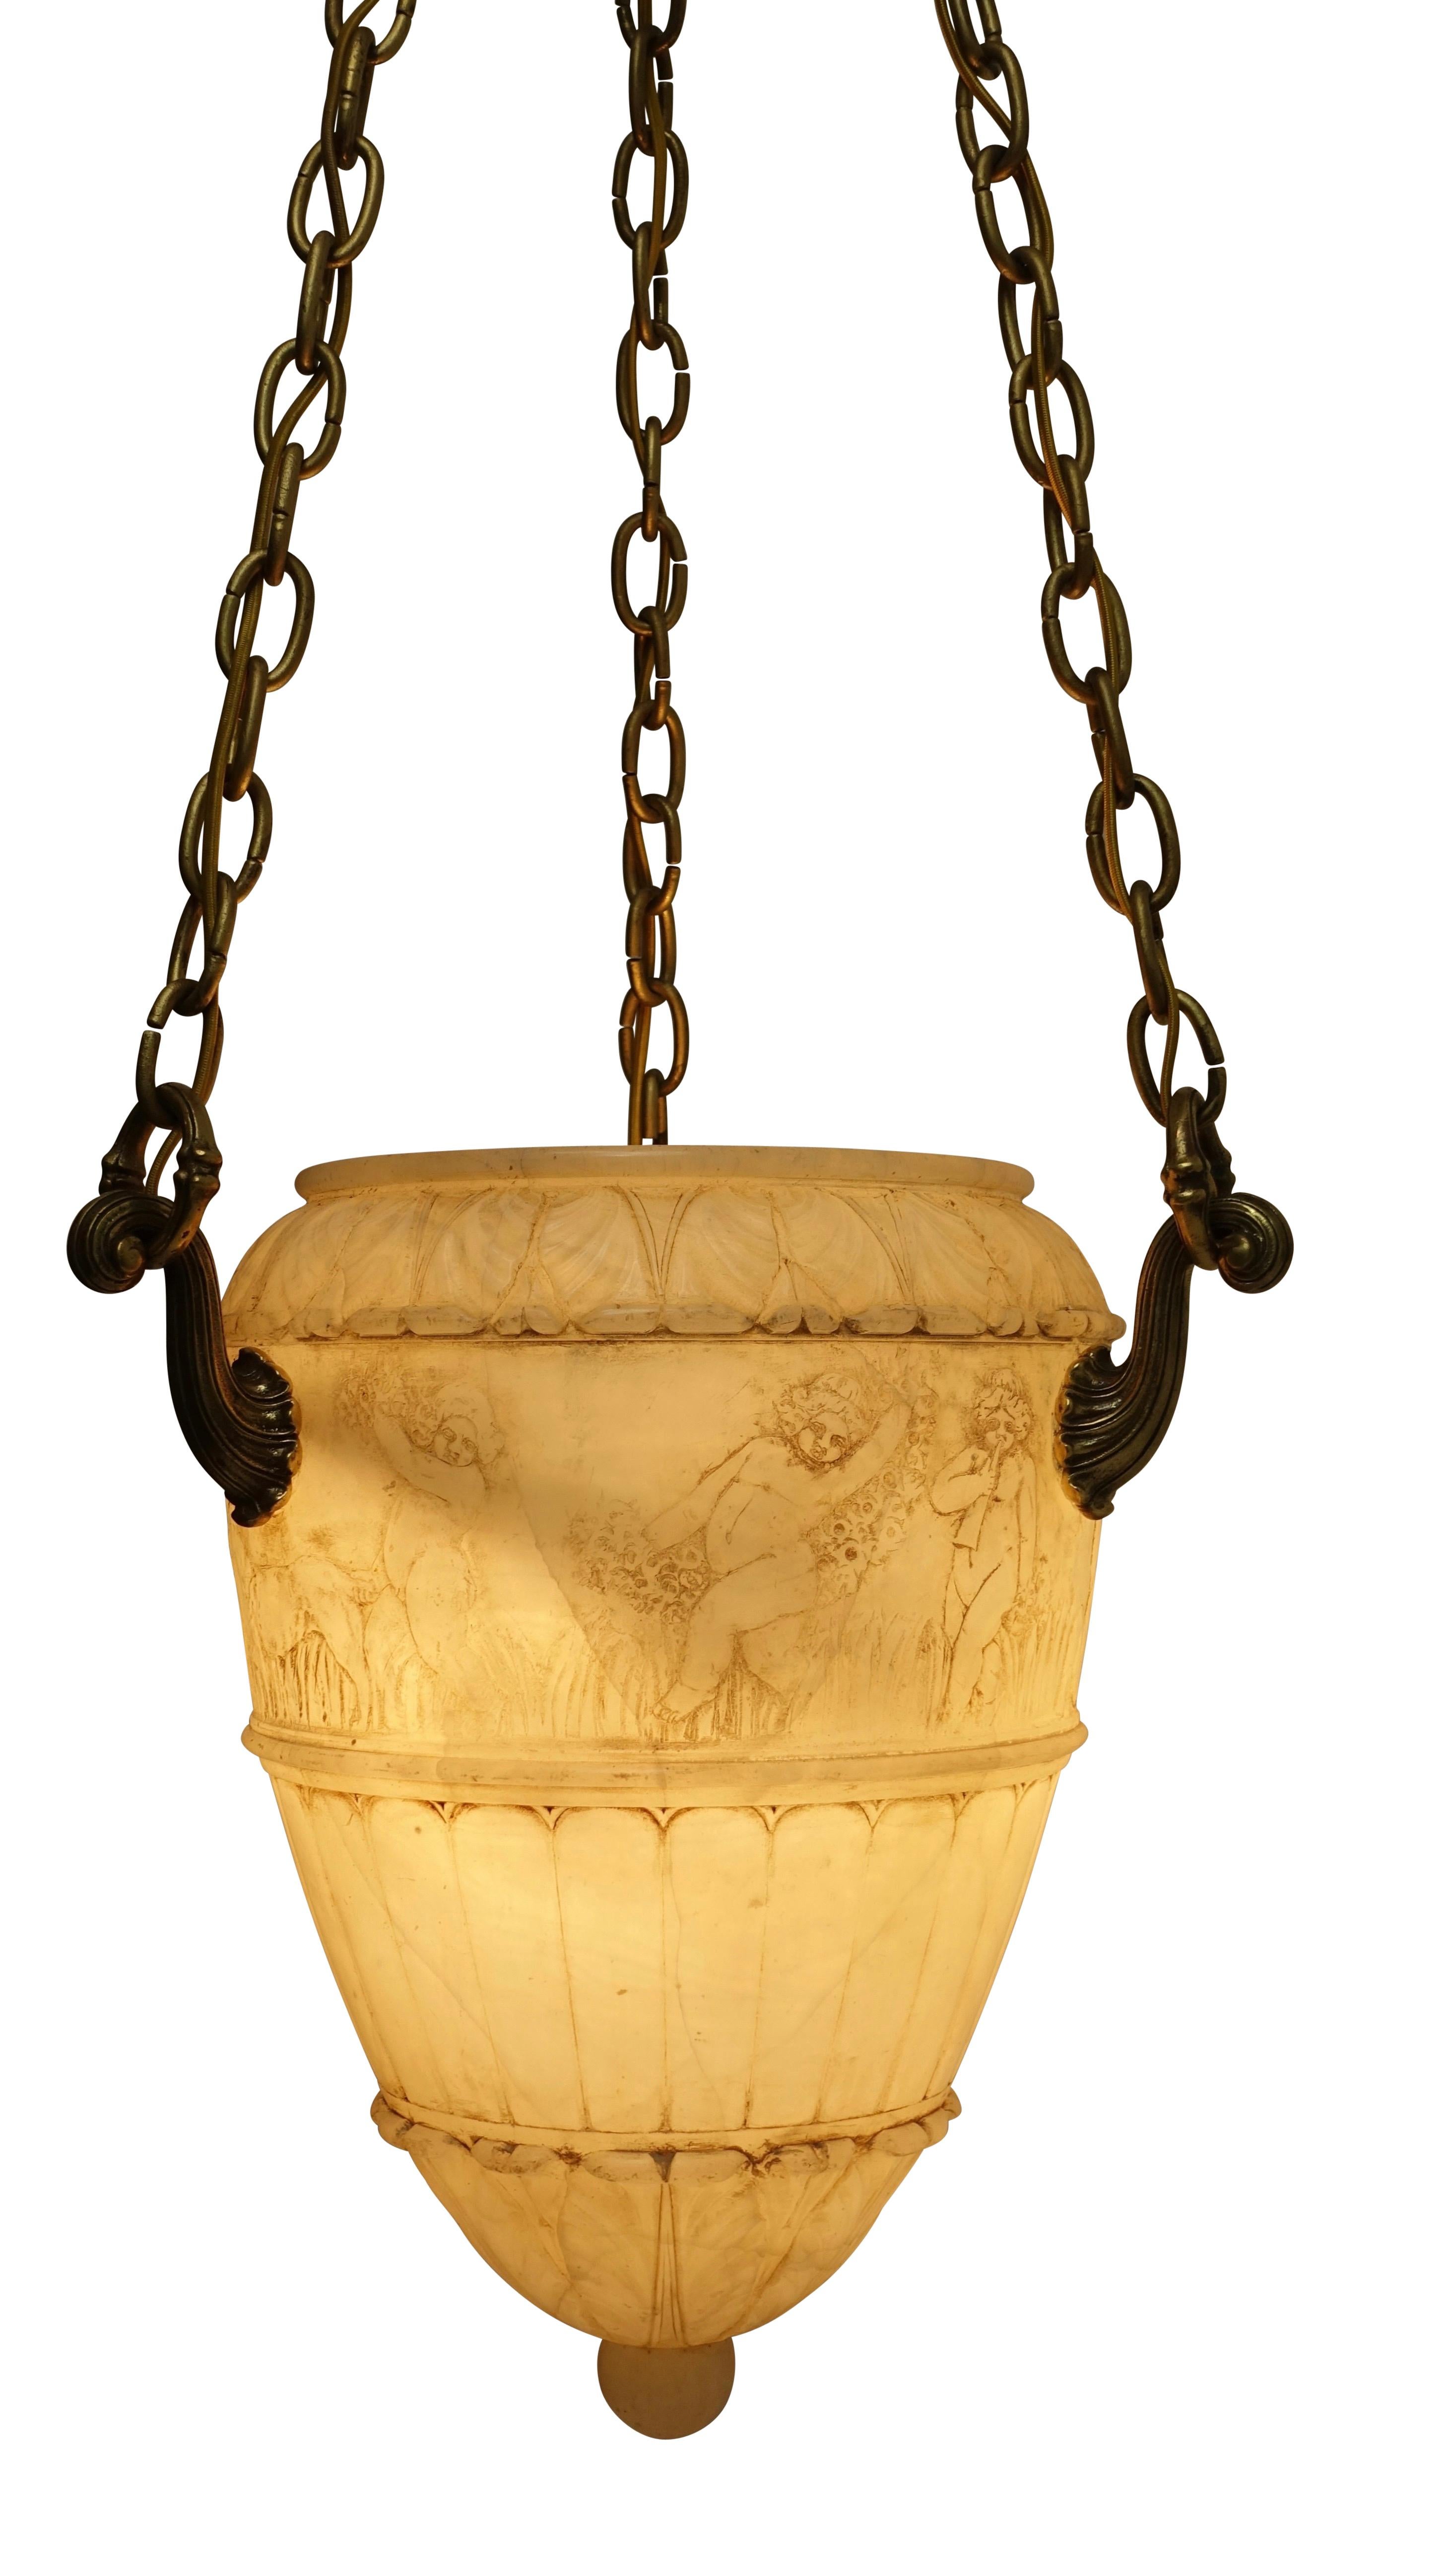 Carved Alabaster Pendant Light Fixture with Brass Hardware, Italian, circa 1910 In Good Condition For Sale In San Francisco, CA